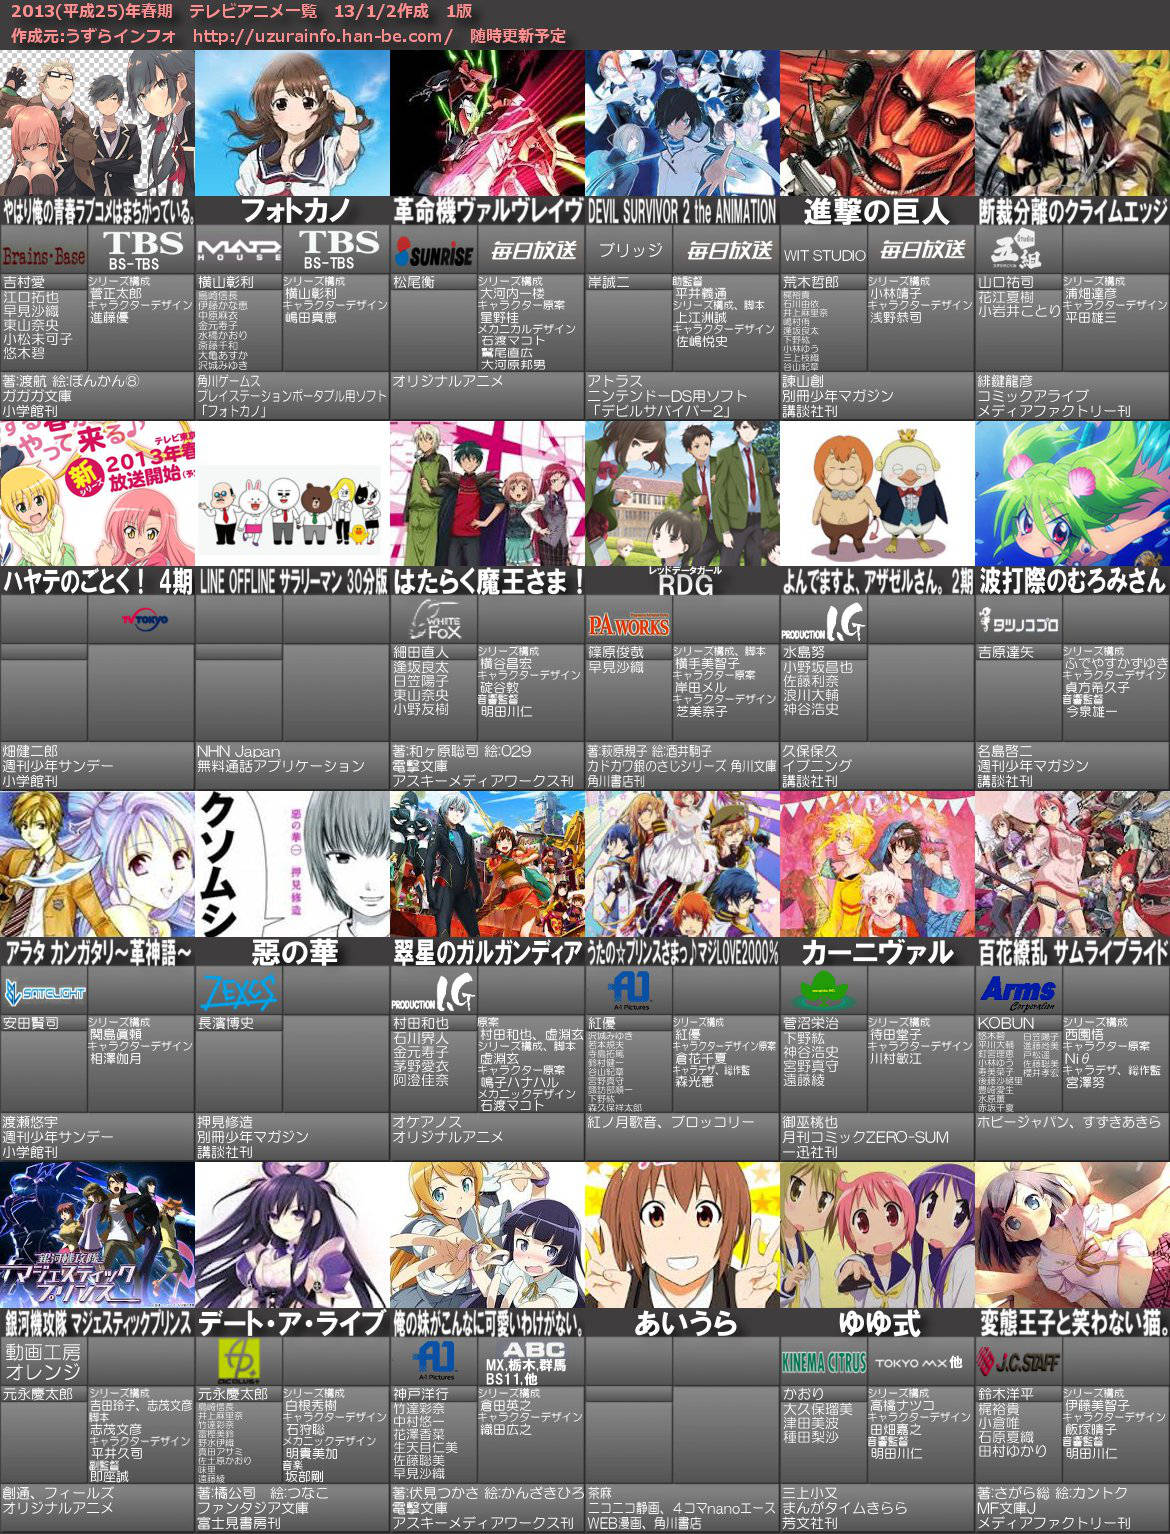 Spring anime 2013 schedule